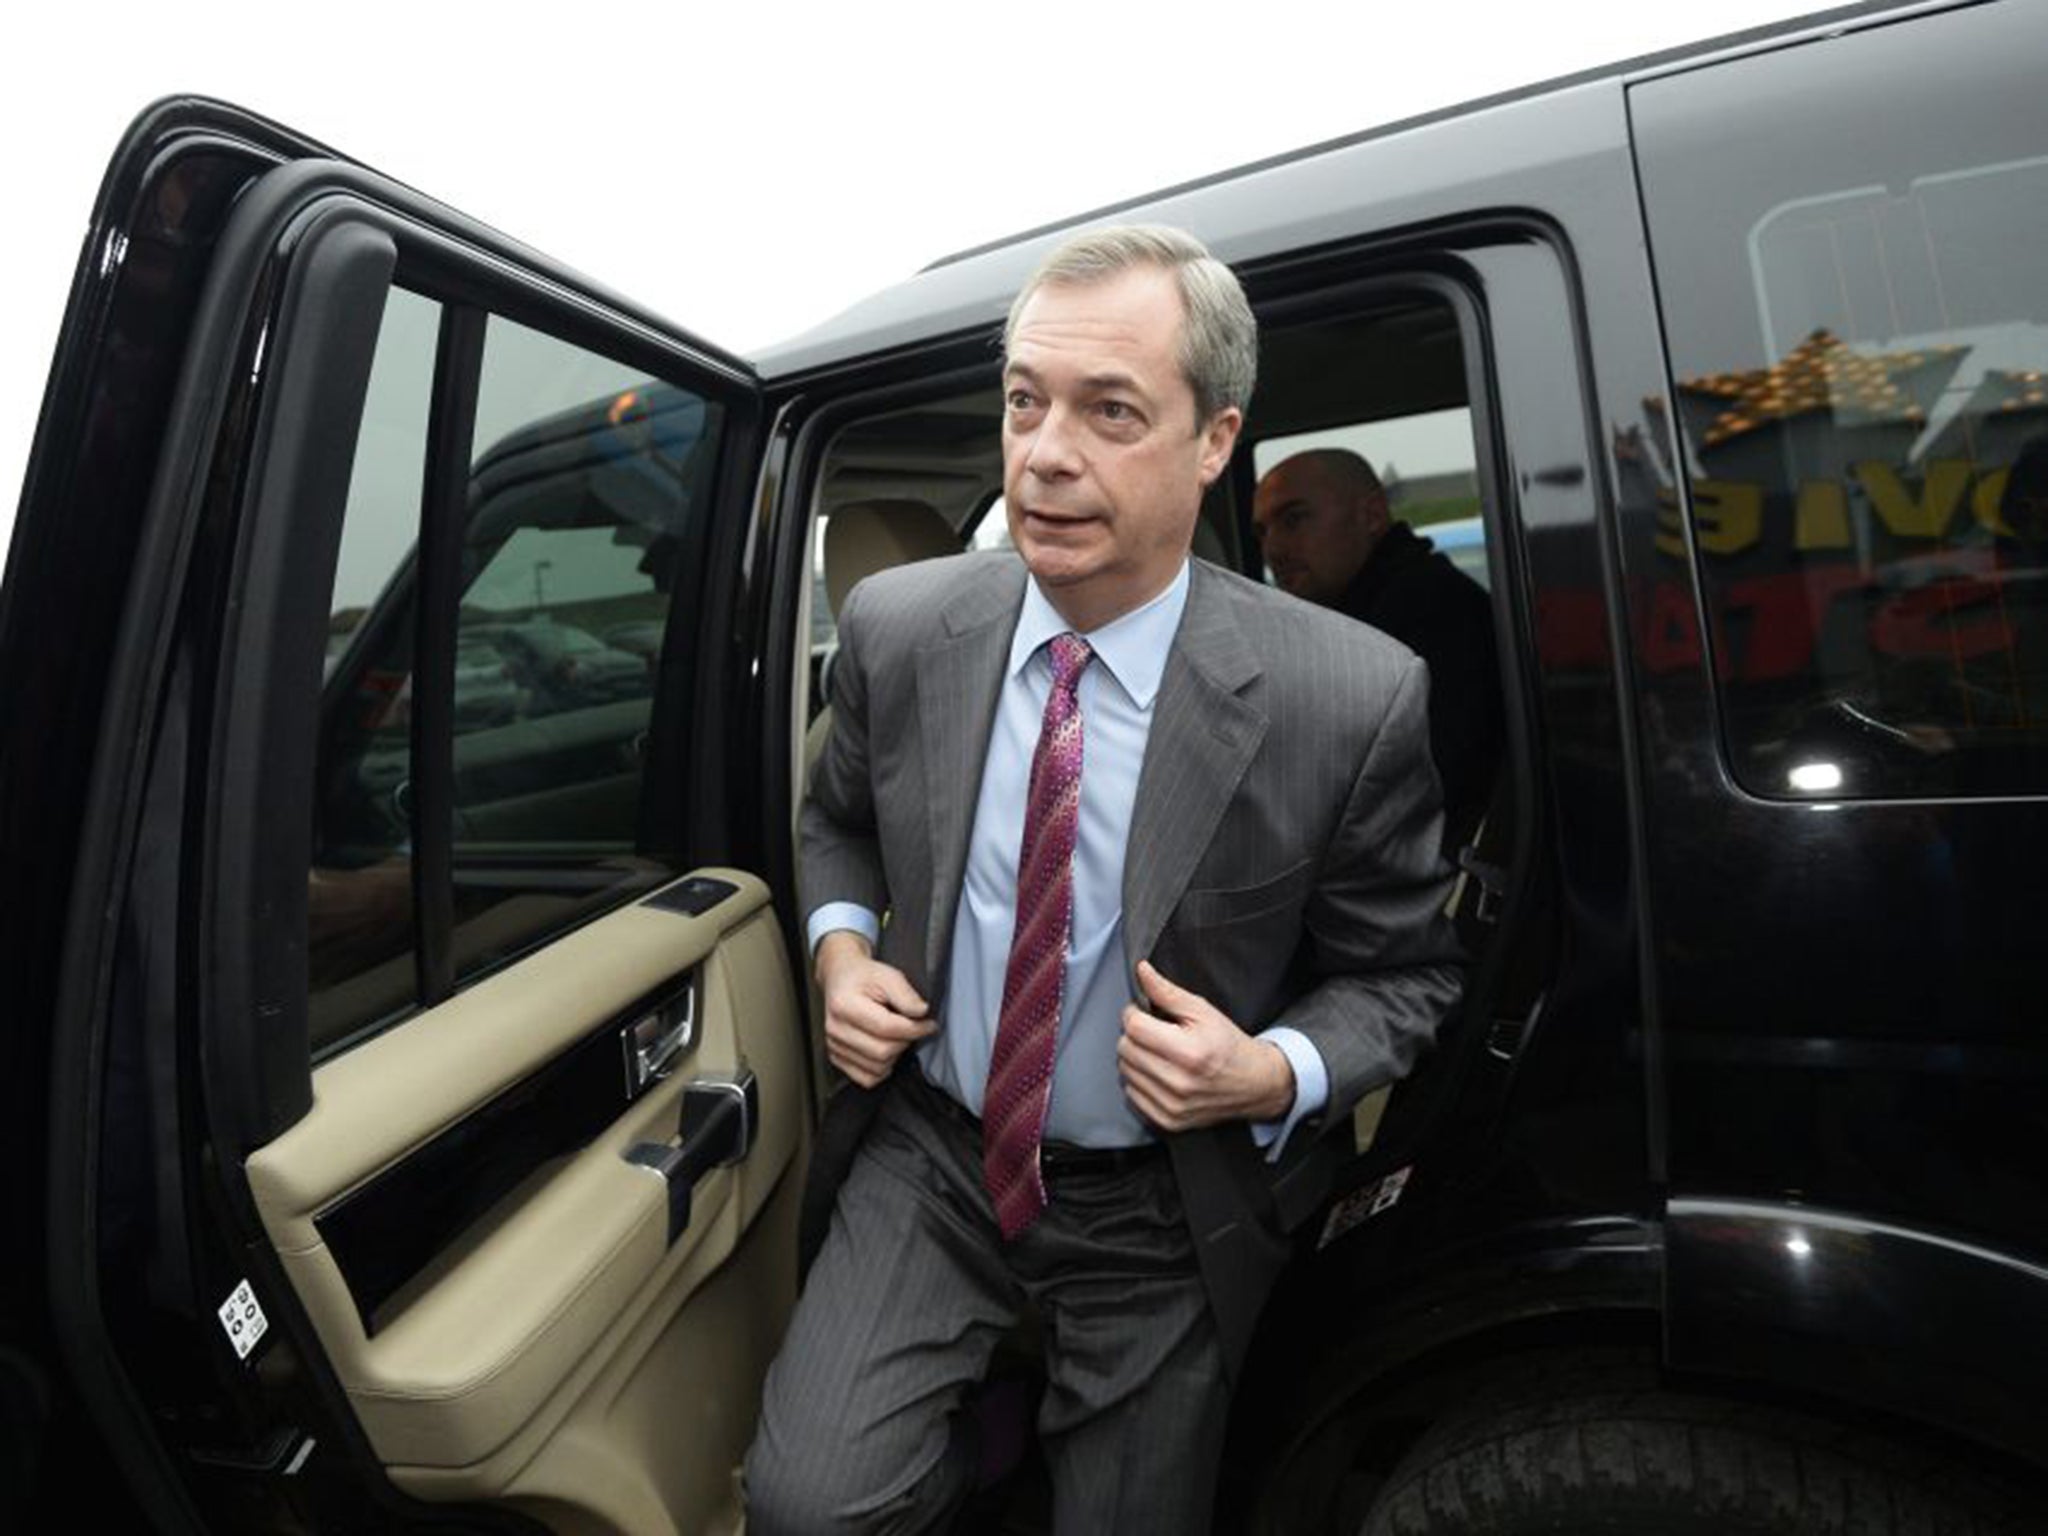 Nigel Farage is likely to be infuriated by the film